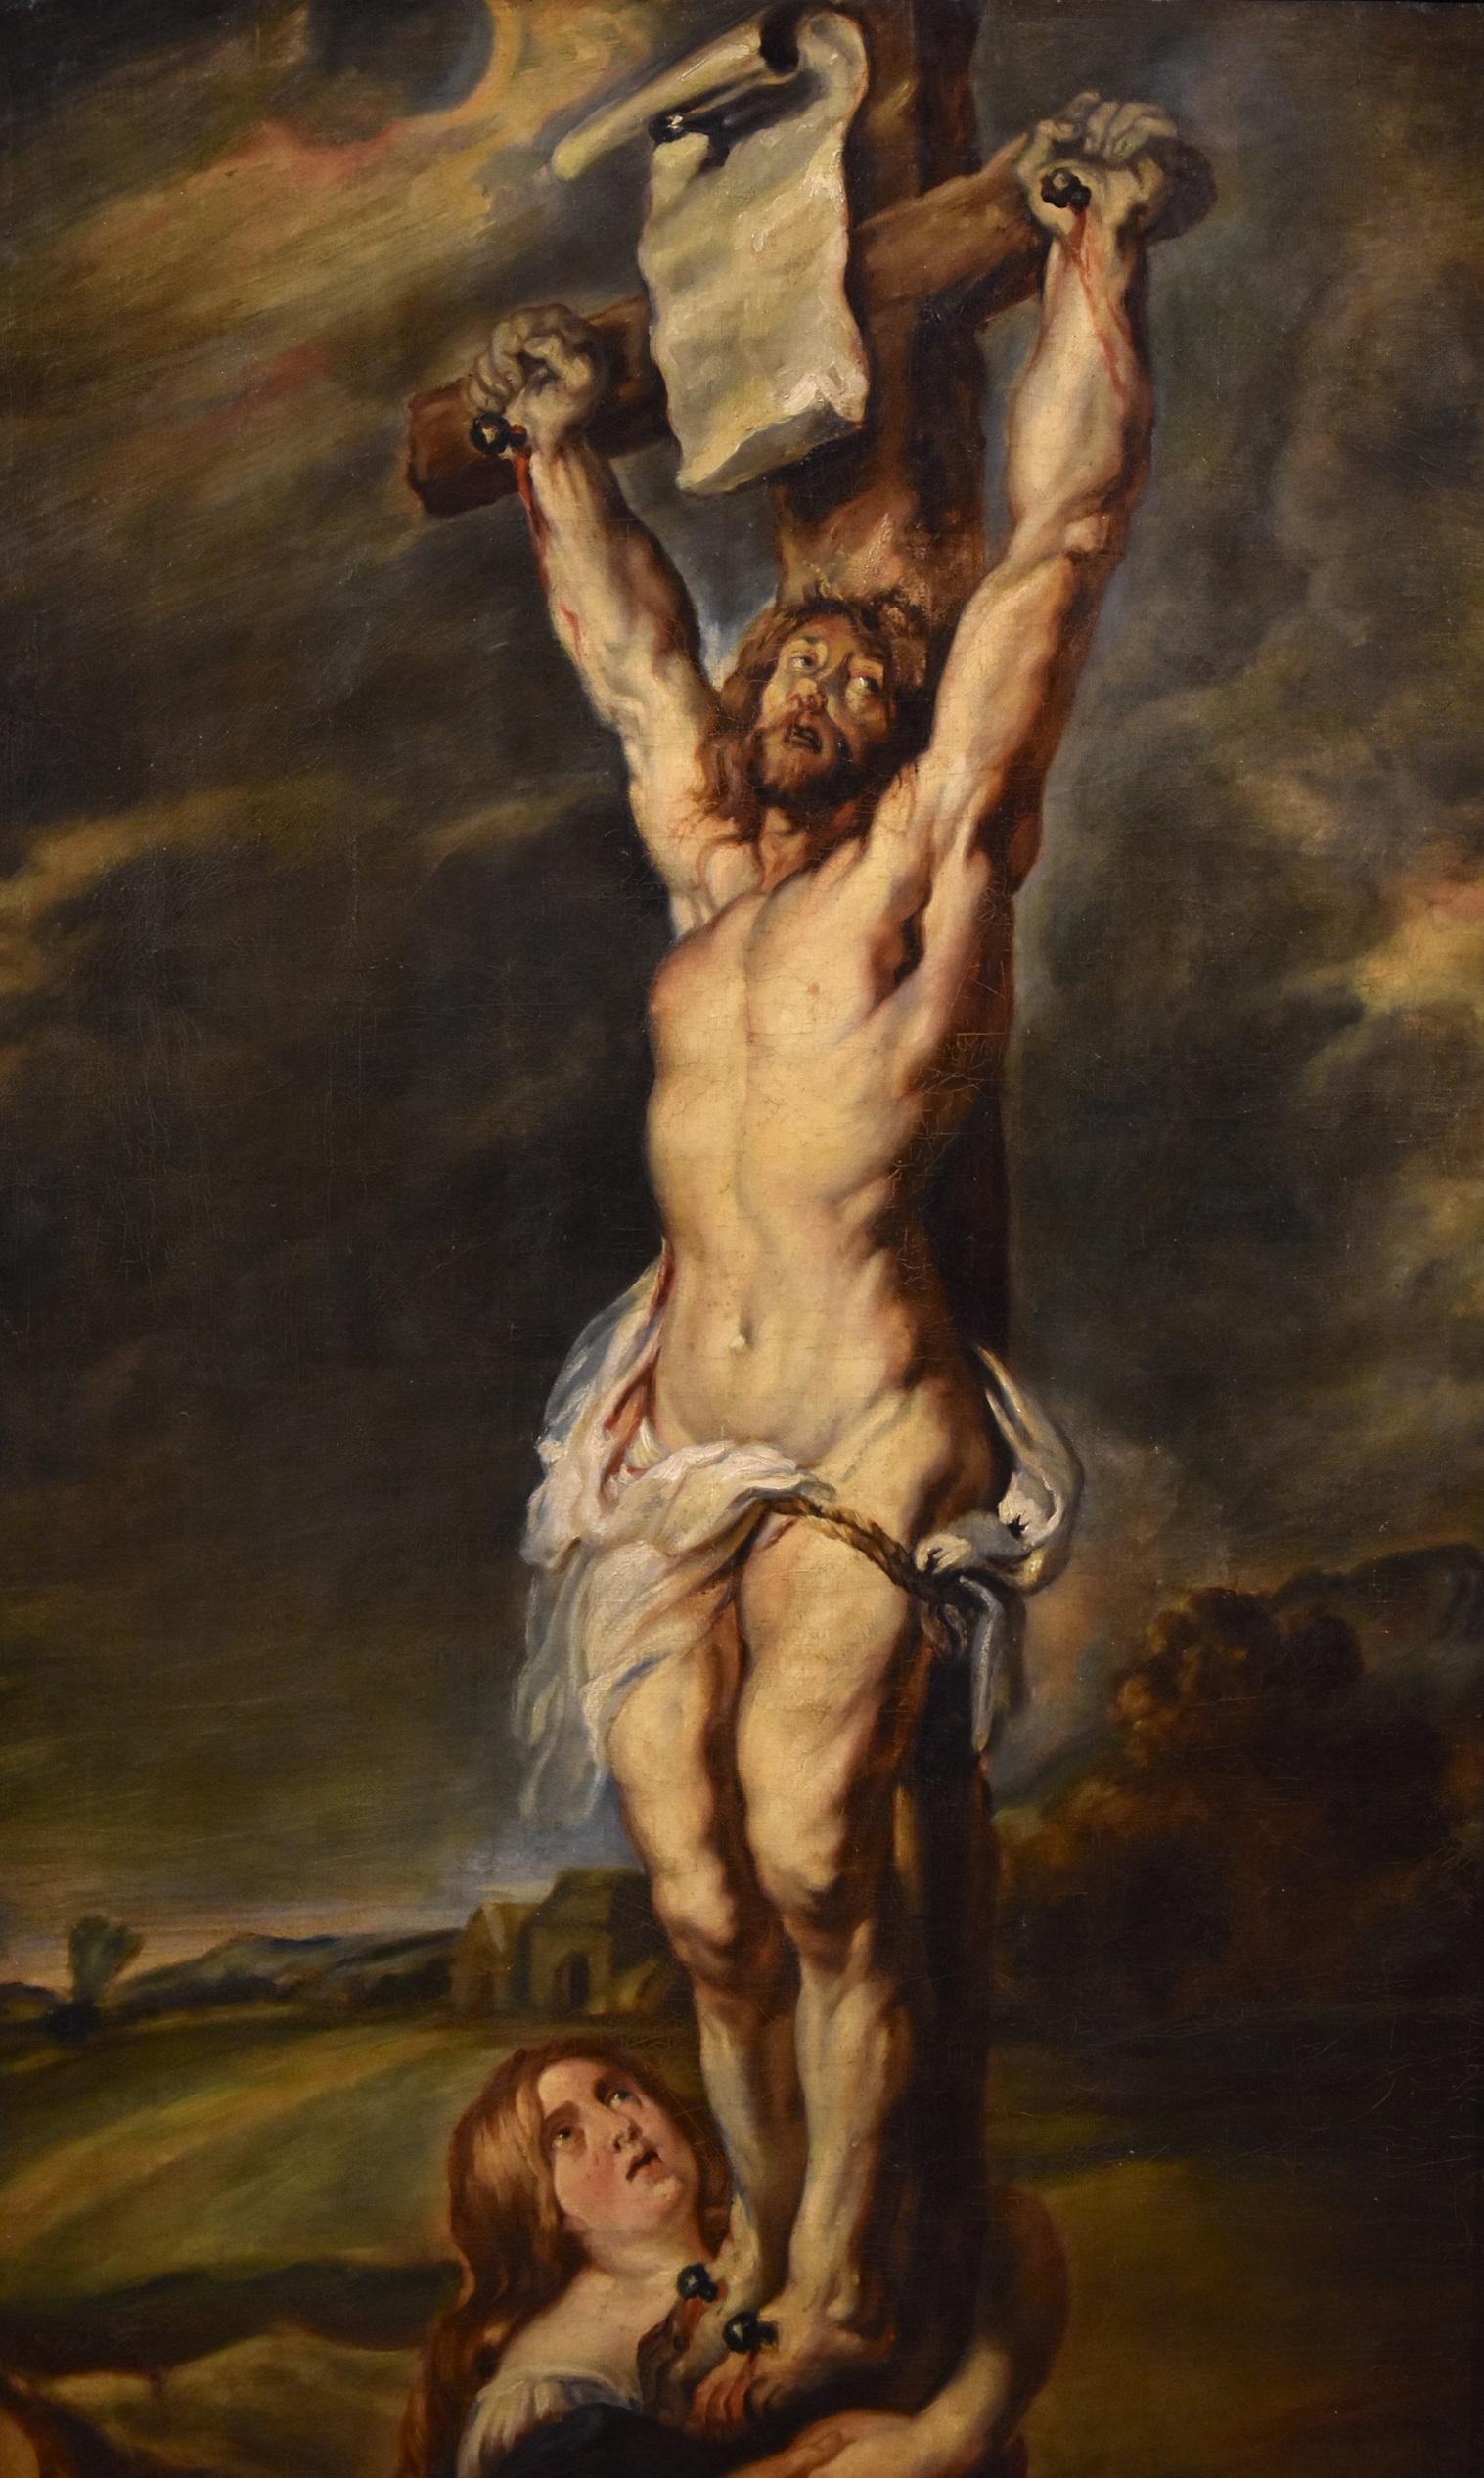 Christ Crucified Rubens Paint Oil on canvas Old master 17th Century Religious 7